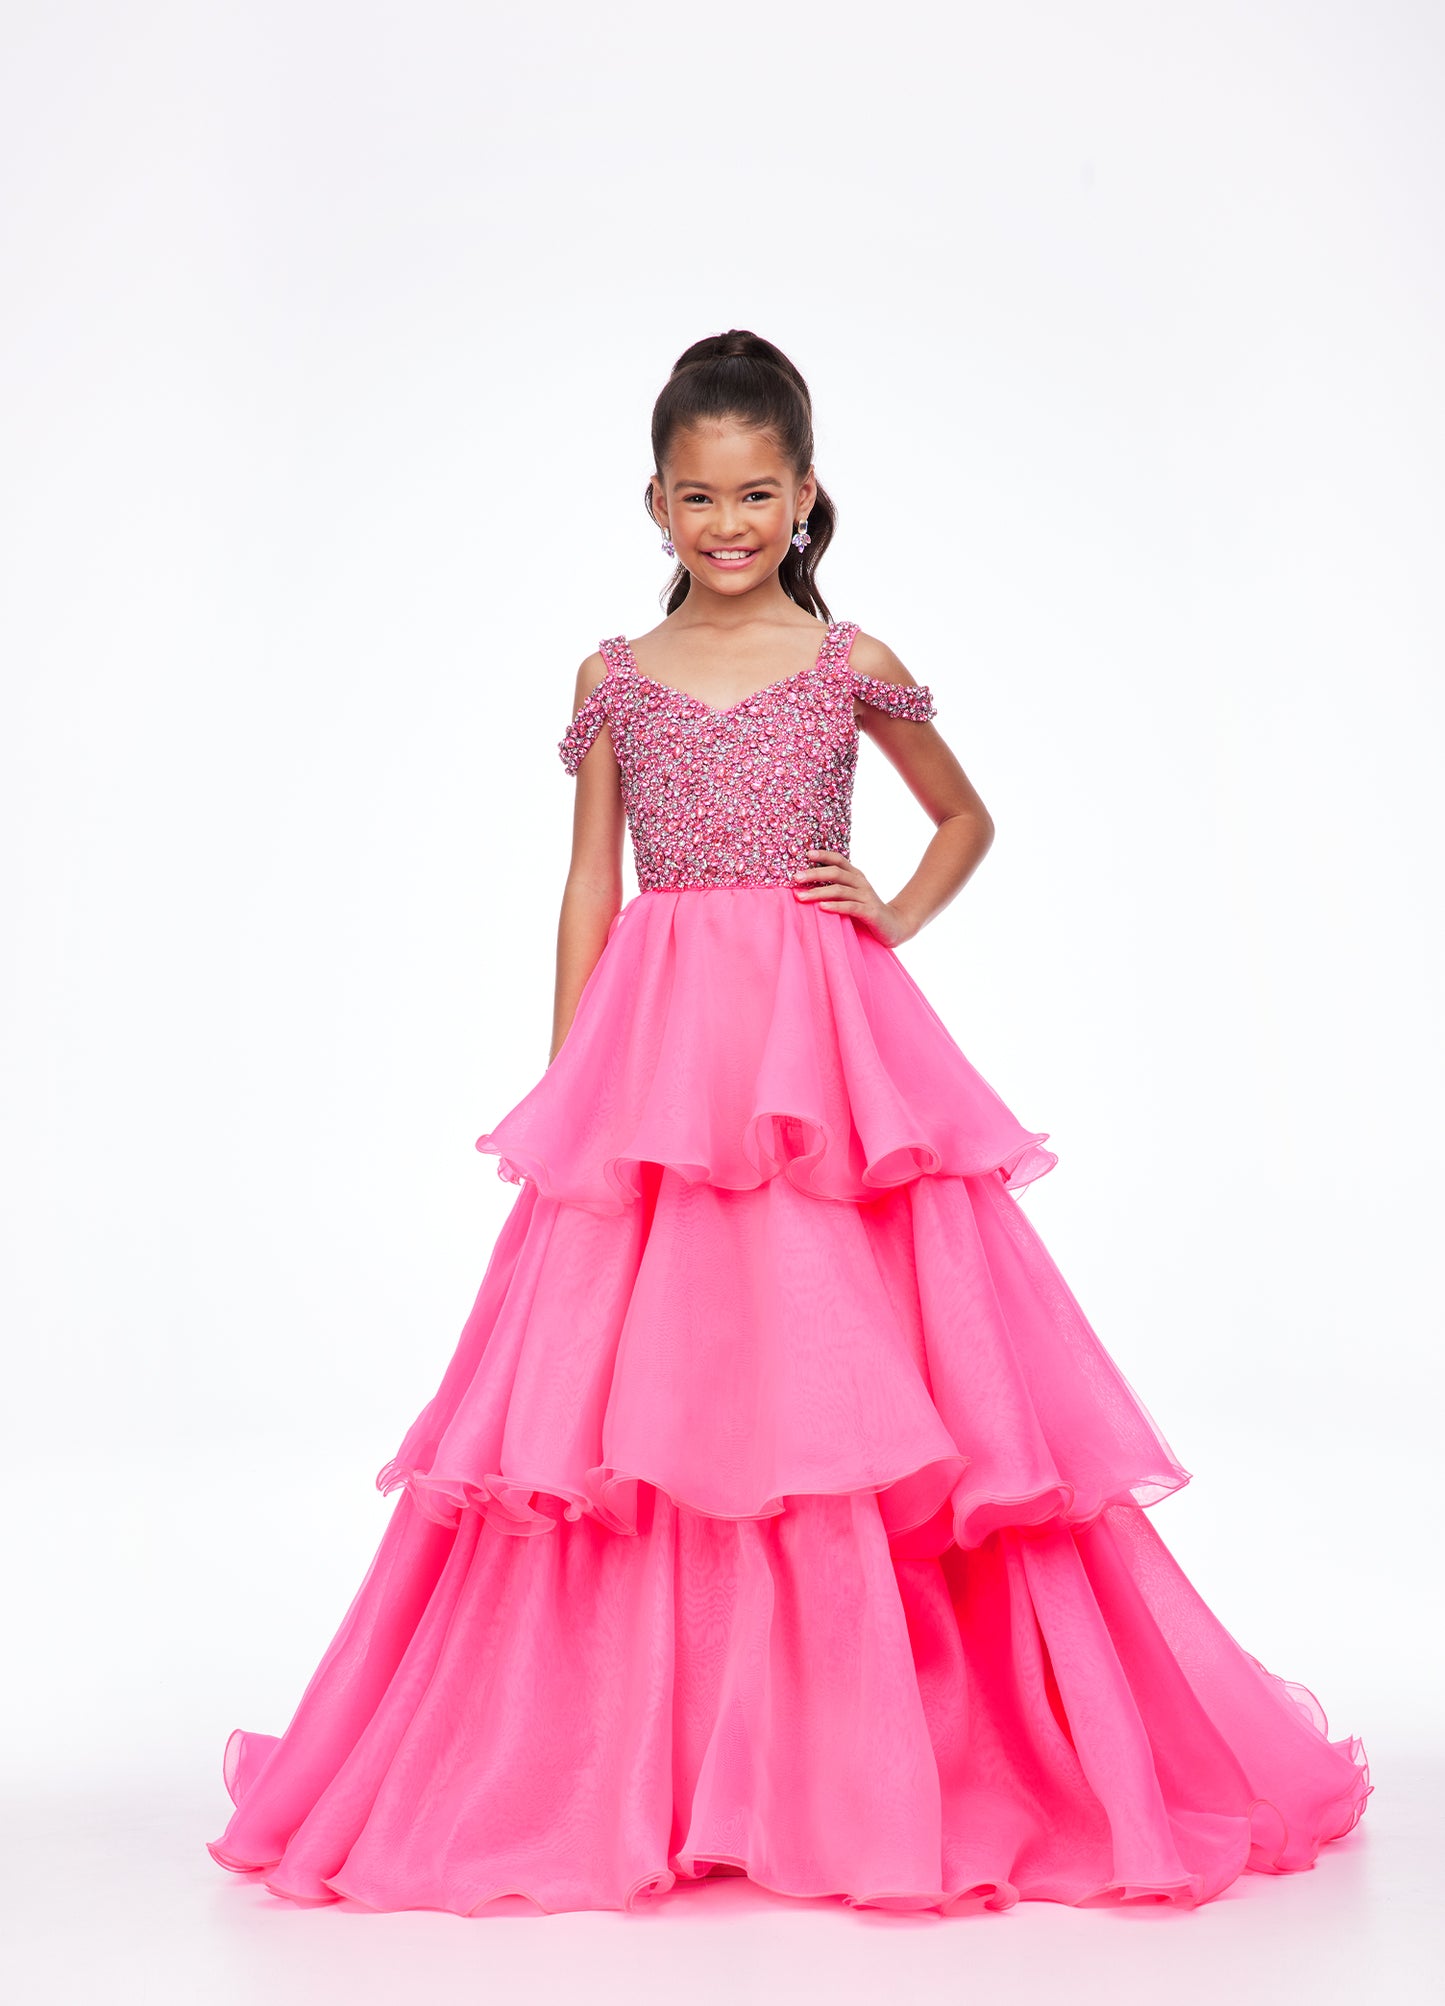 Ashley Lauren Kids 8101 Girls Pageant Dress.  The crystal encrusted bodice on this kids Pageant Gown consists of a slight V-Neckline and off the shoulder straps. The A Line multi-tiered organza ruffle skirt completes the look with a long train.   Available colors:  Hot Pink, Lilac, Turquoise